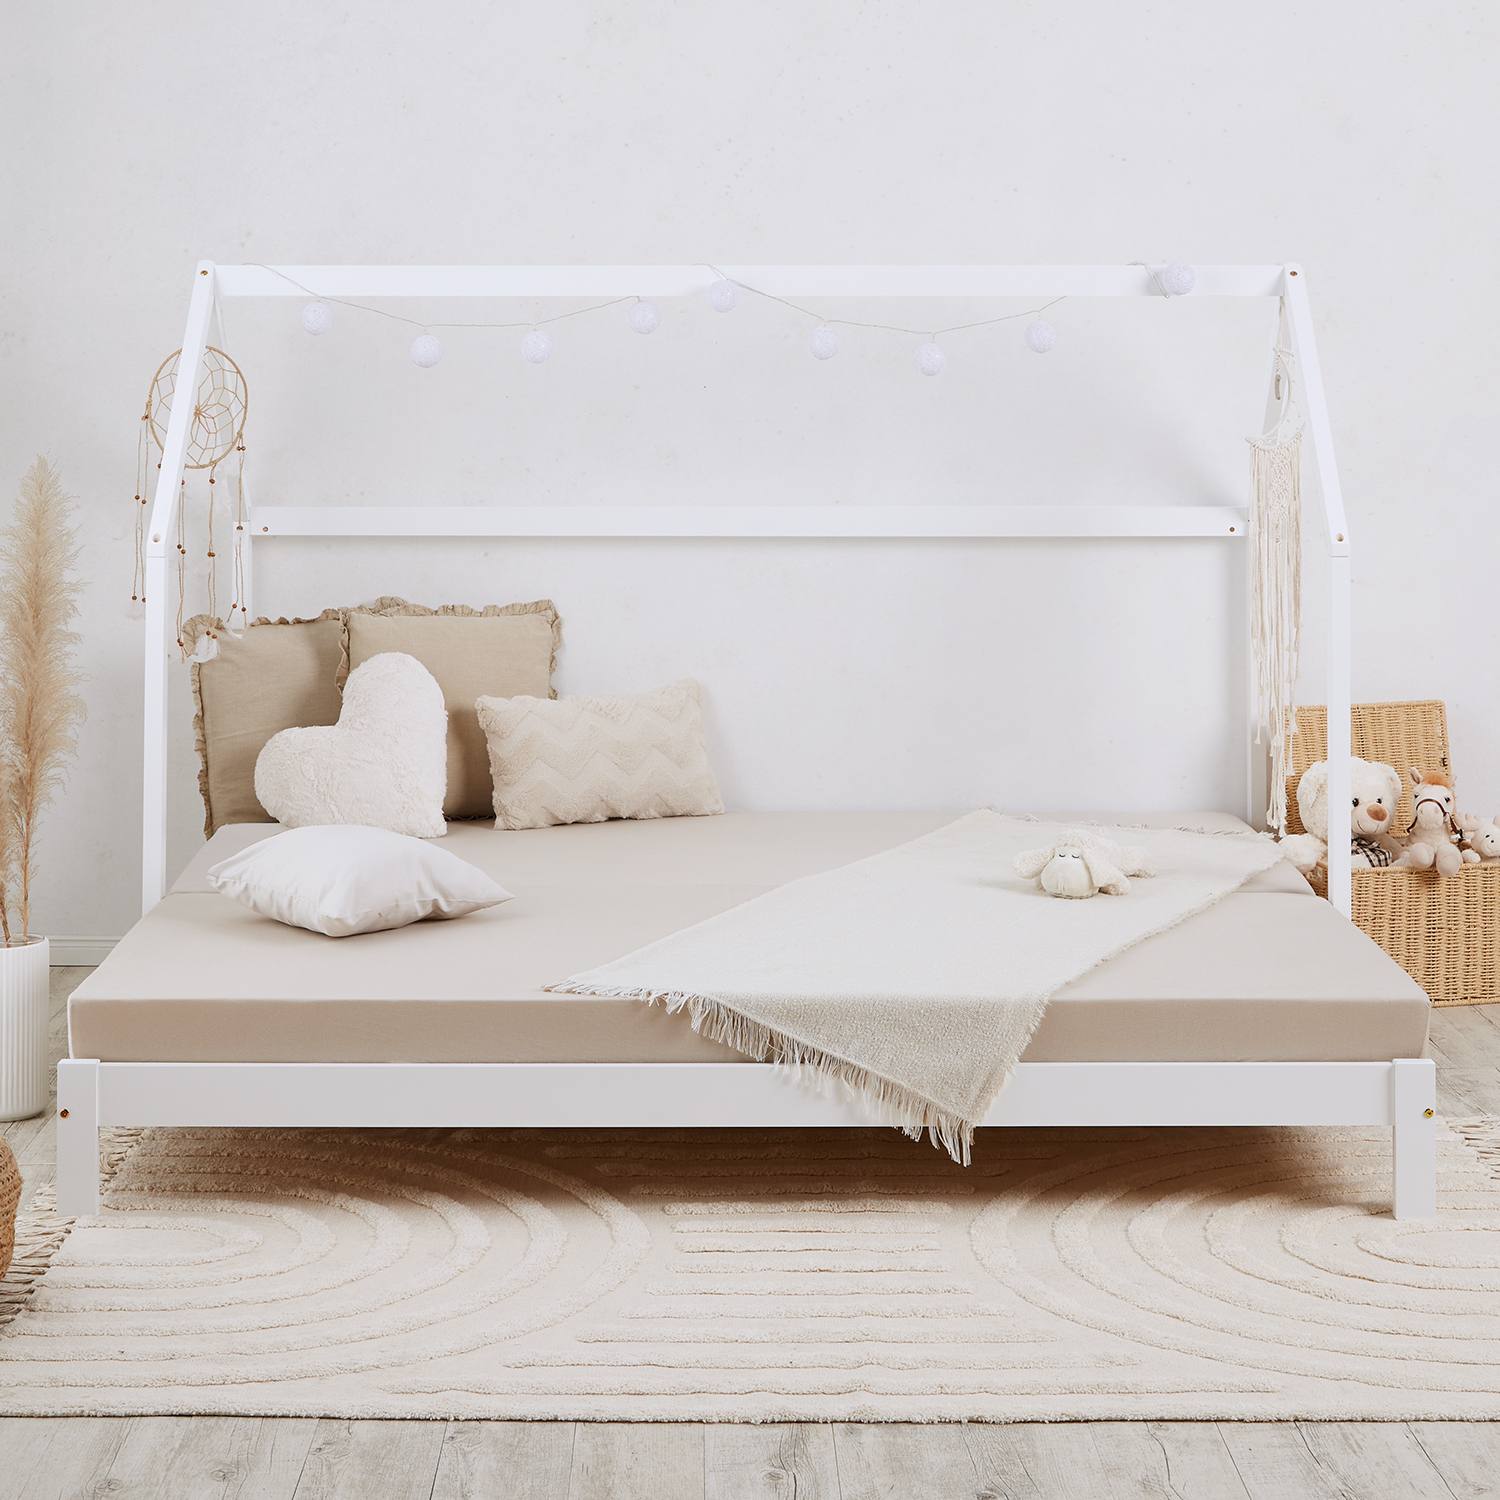 Children's Bed with Pull Out Bed 2 Mattresses 90x200 cm House Bed Treehouse Bed Children's Single Bed Wooden Frame White Trundle Bed Slats